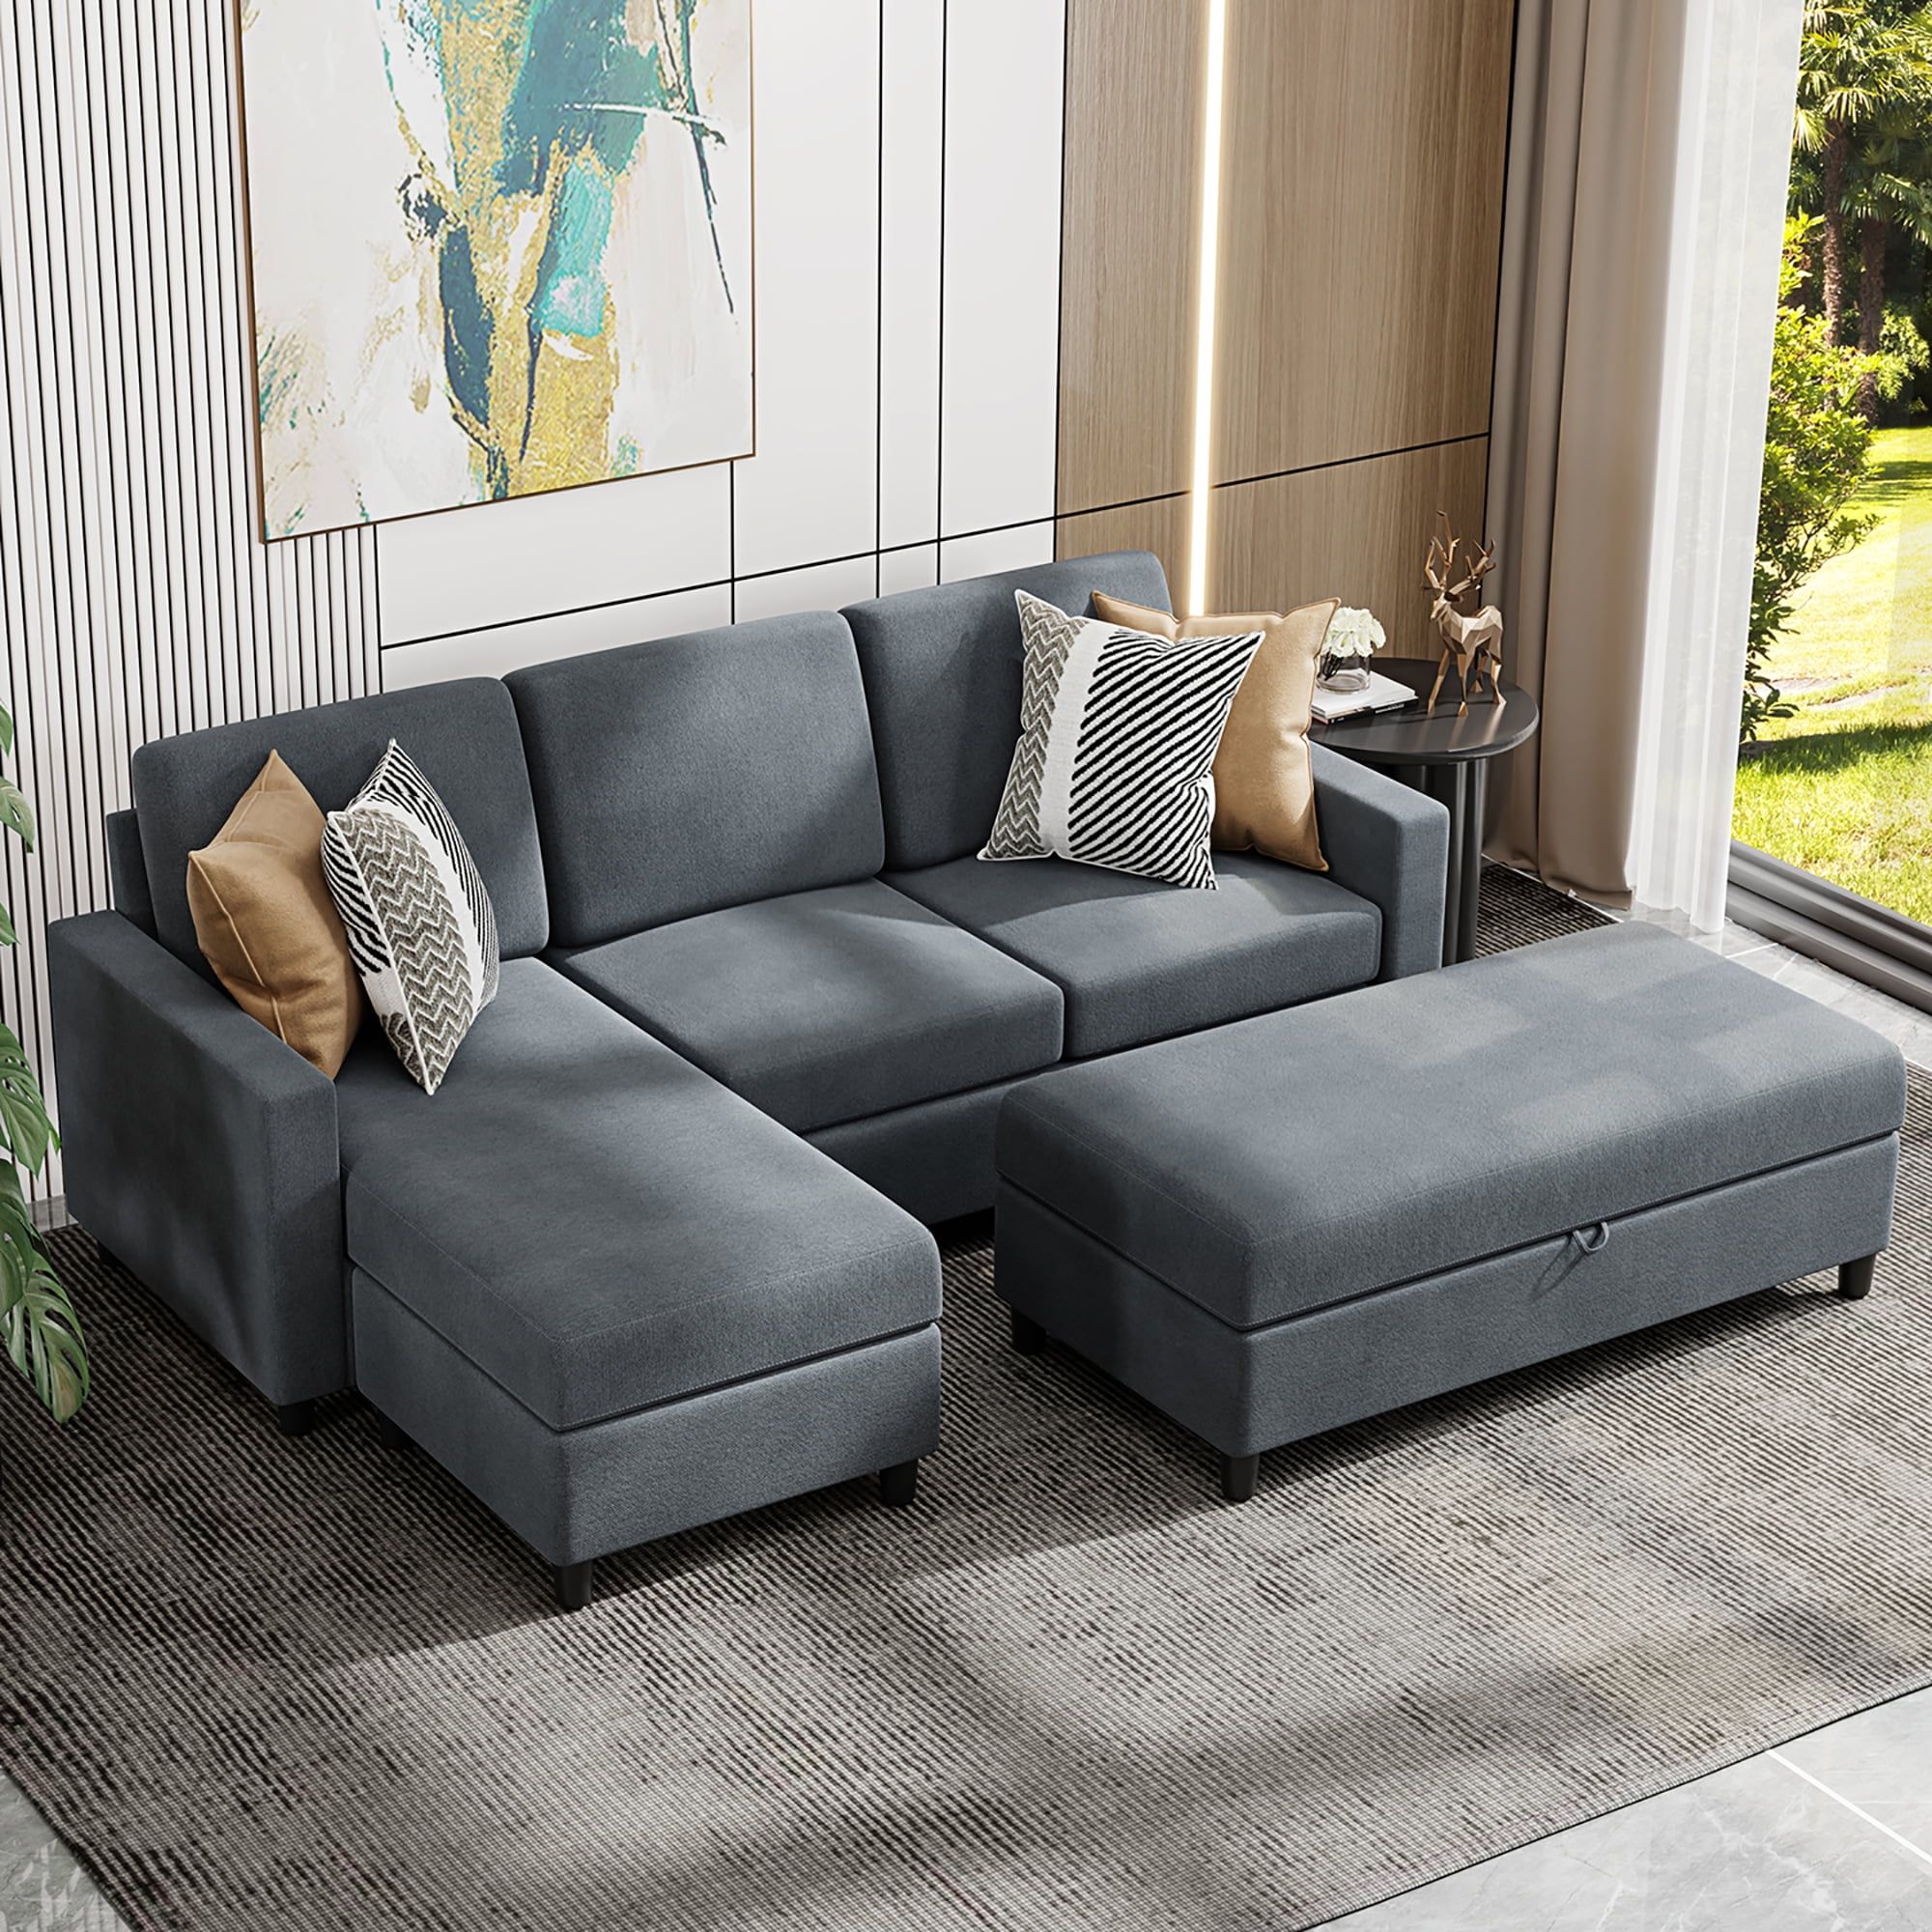 Convertible Sectional Sofa Couch With Storage Ottoman, L Shaped Wide Reversible  Chaise With Linen Fabric(charcoal Grey) – Walmart Intended For Reversible Sectional Sofas (Photo 1 of 15)